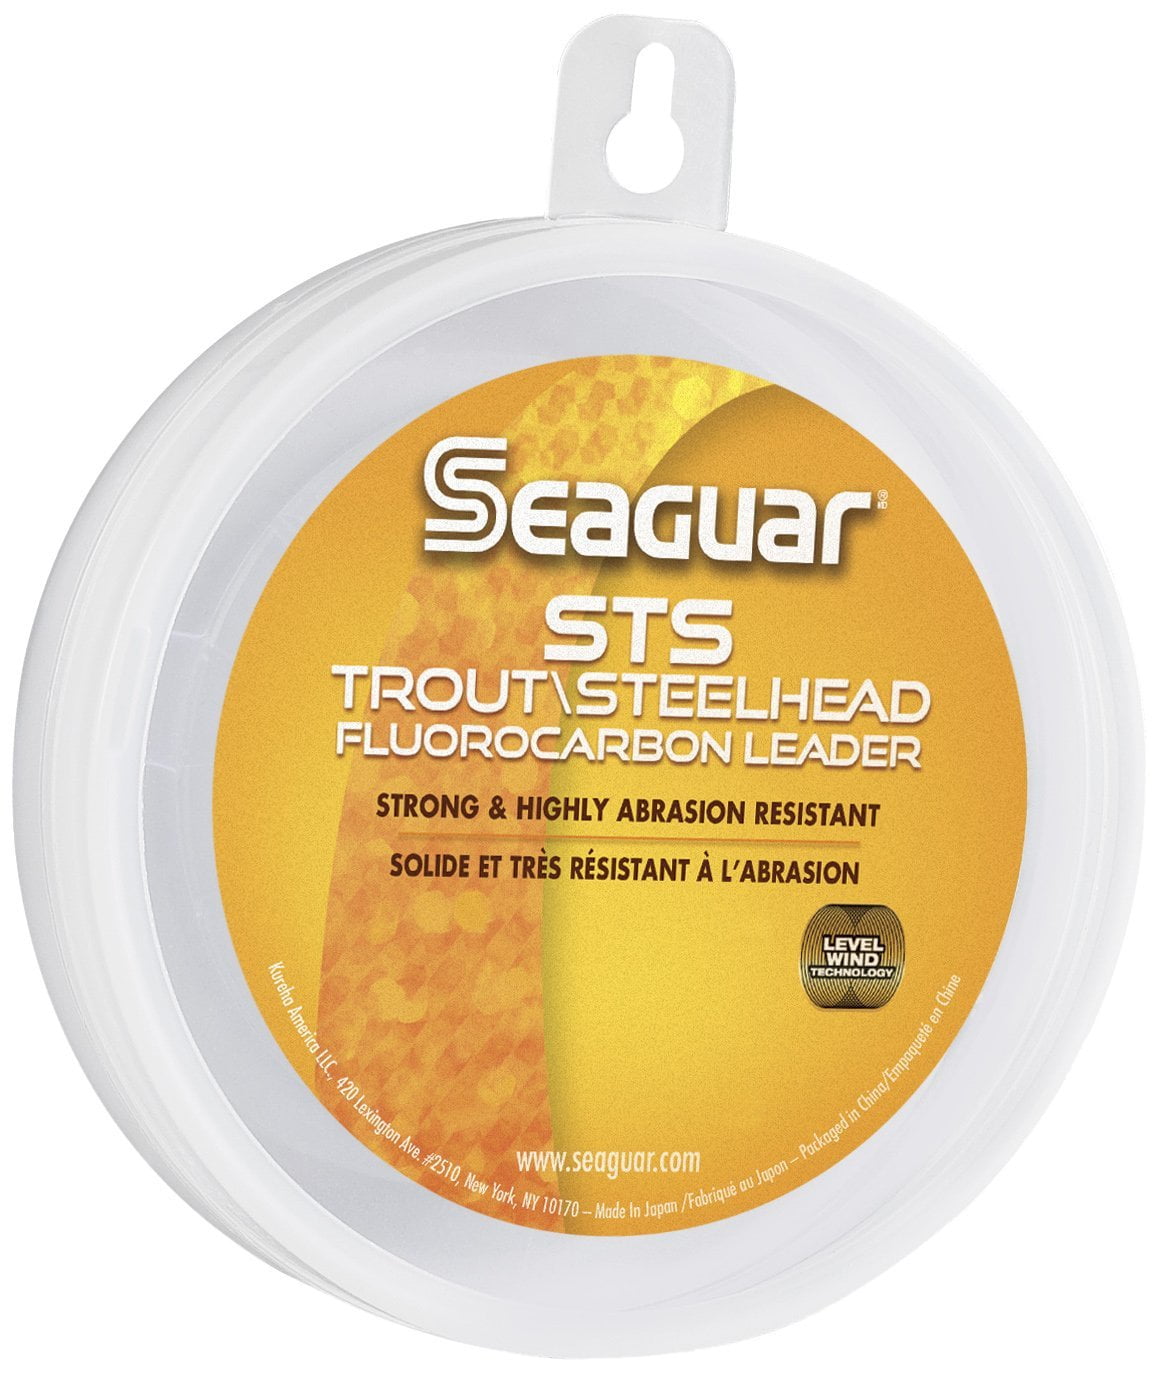 Seaguar 10STS100 STS Trout/steelhead Fluorocarbon Leader Fishing Line for sale online 